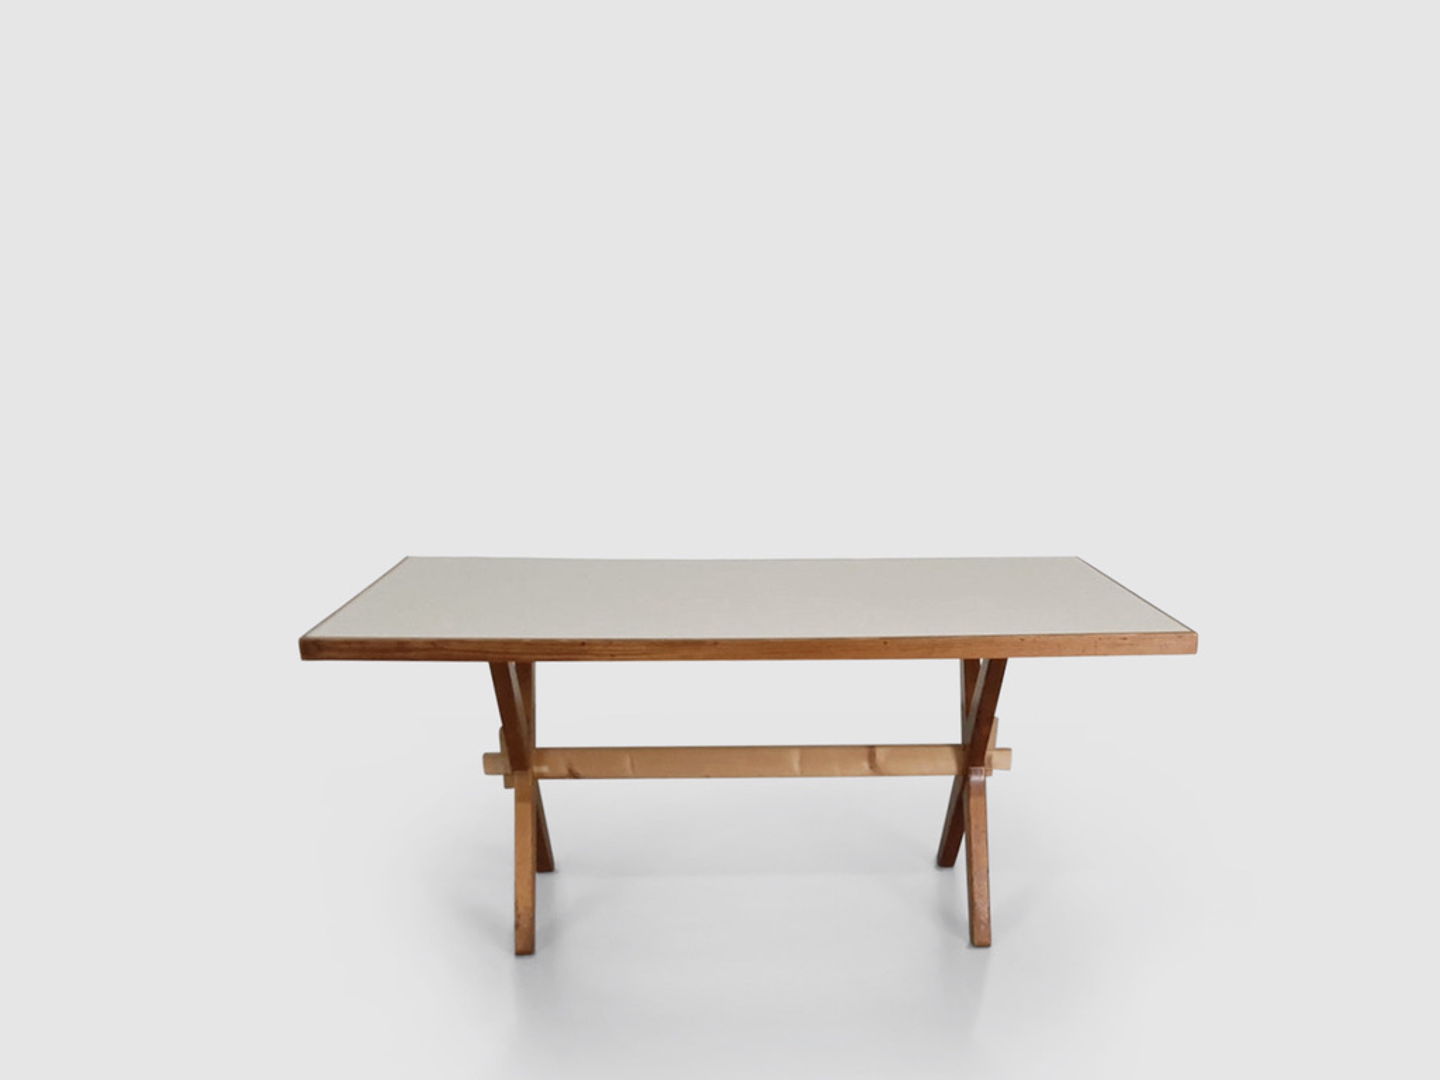 Dining table by Wim den Boon and W.J. Kok for Goed Wonen Netherlands 1950s